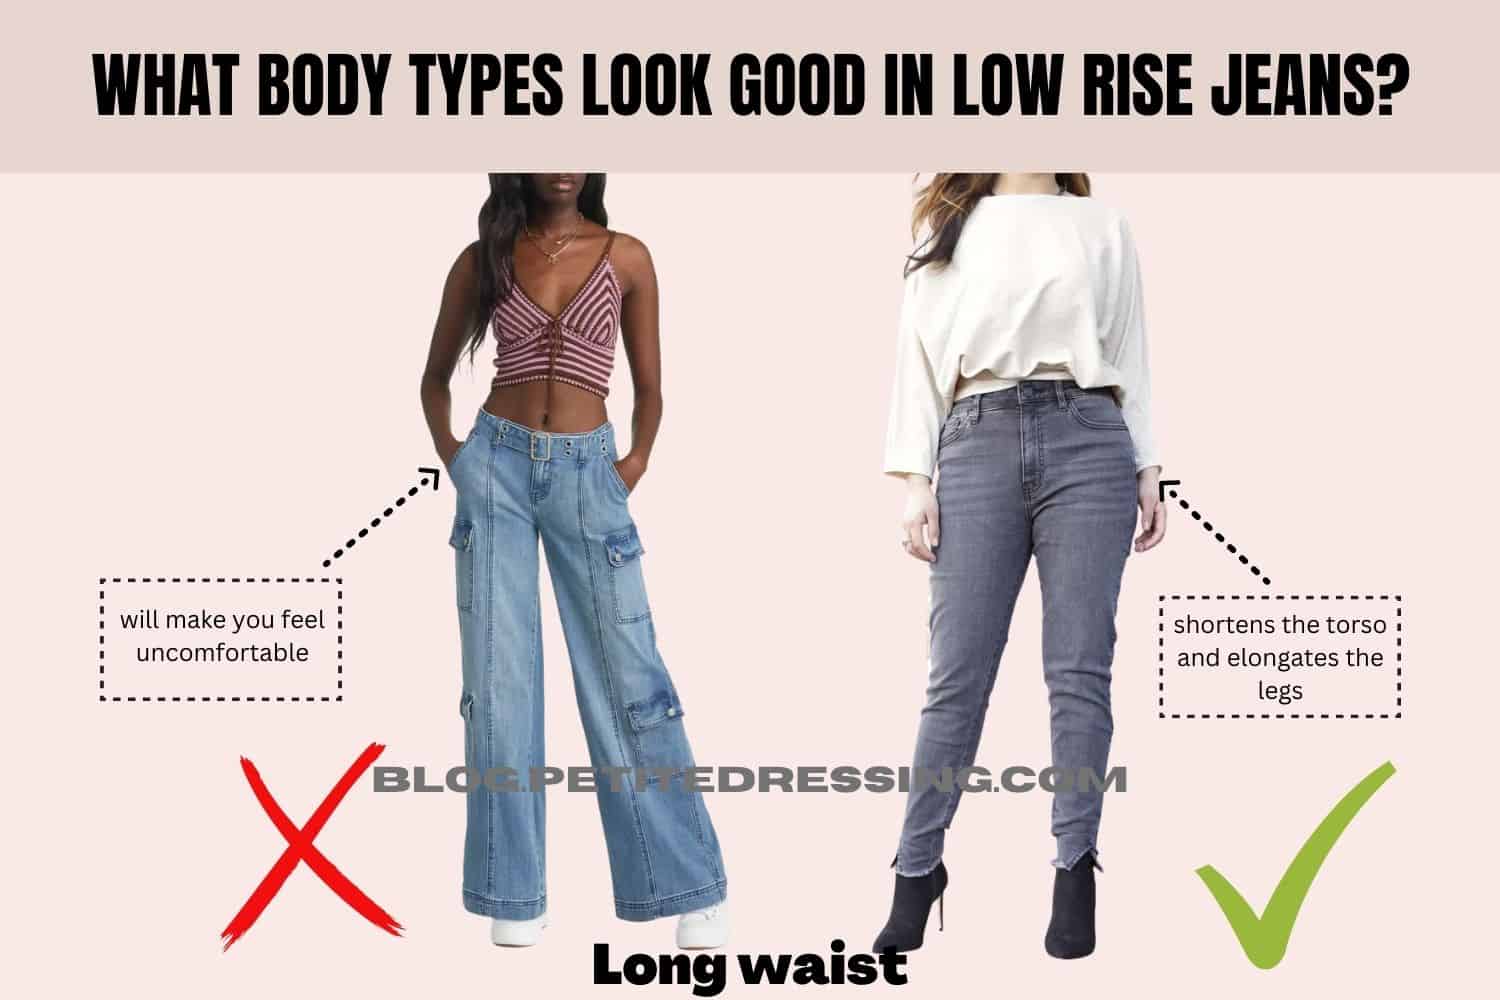 What Body Types Look Good in Low Rise Jeans?